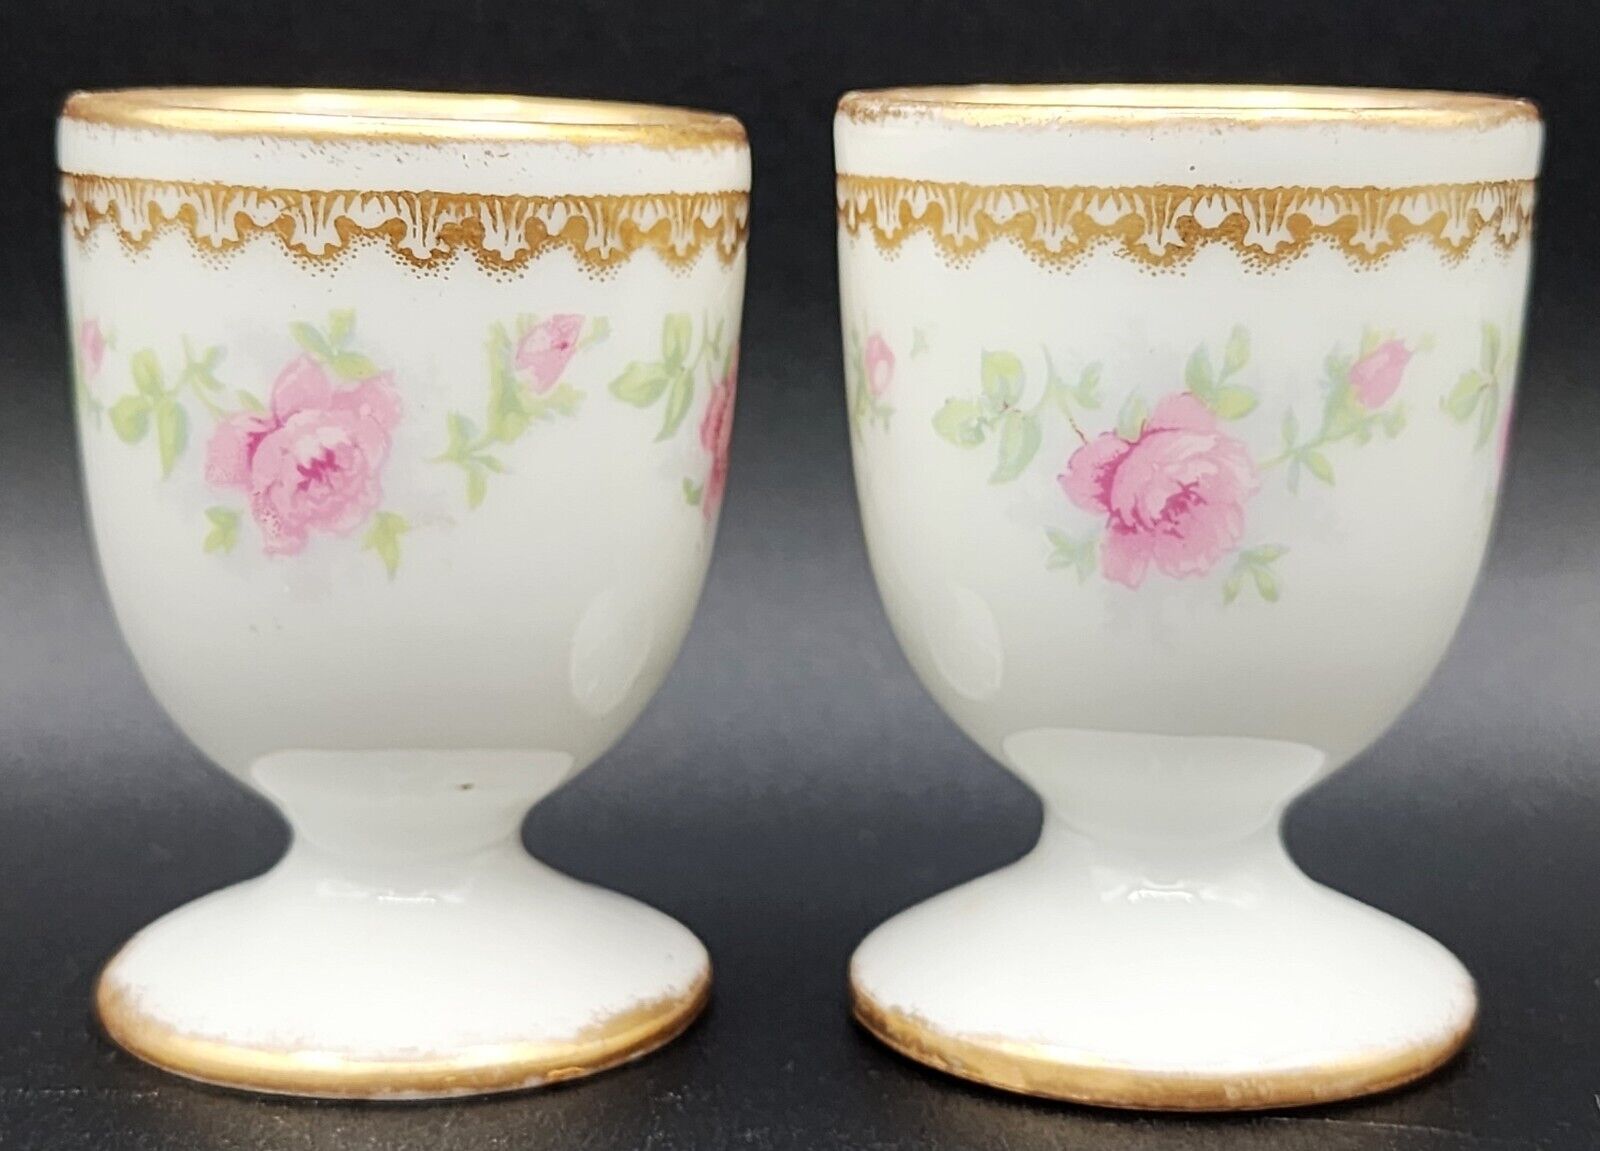 2 Theodore Haviland Limoges France Egg Cups with pink Roses and Gold Rims 1903